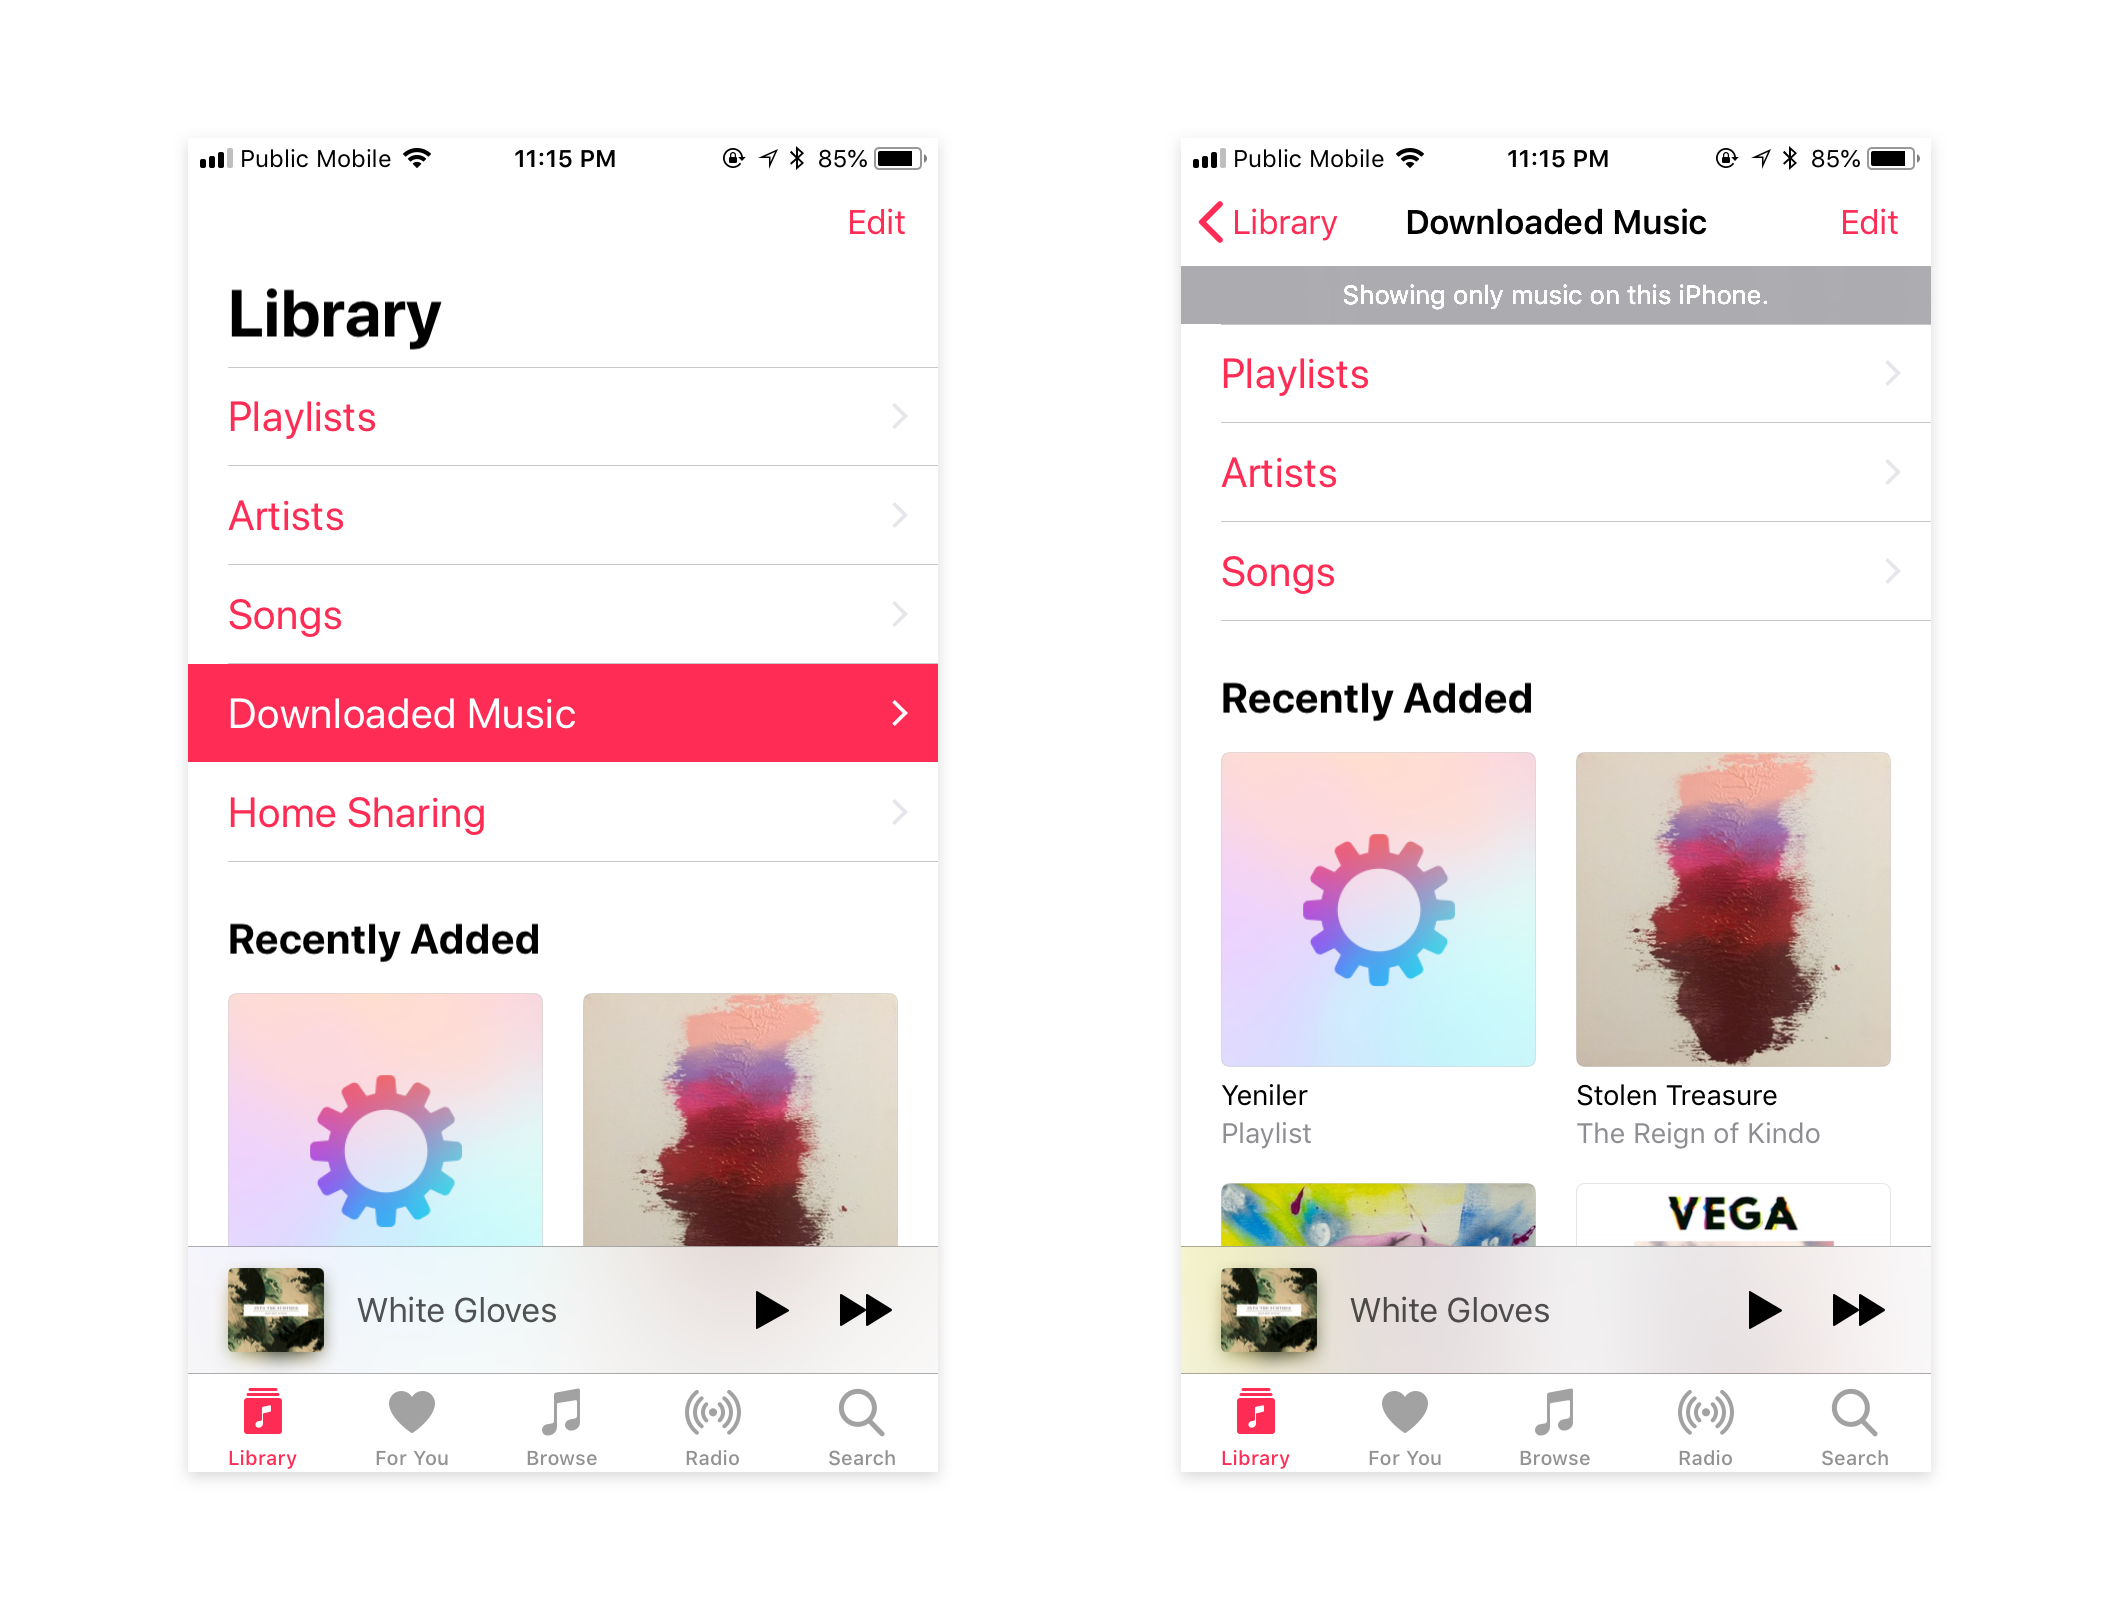 Apple Music app screenshots: One has Downloaded Music highlighted as an option in the main Library screen, and the other showing the same screen with the title Downloaded Music.